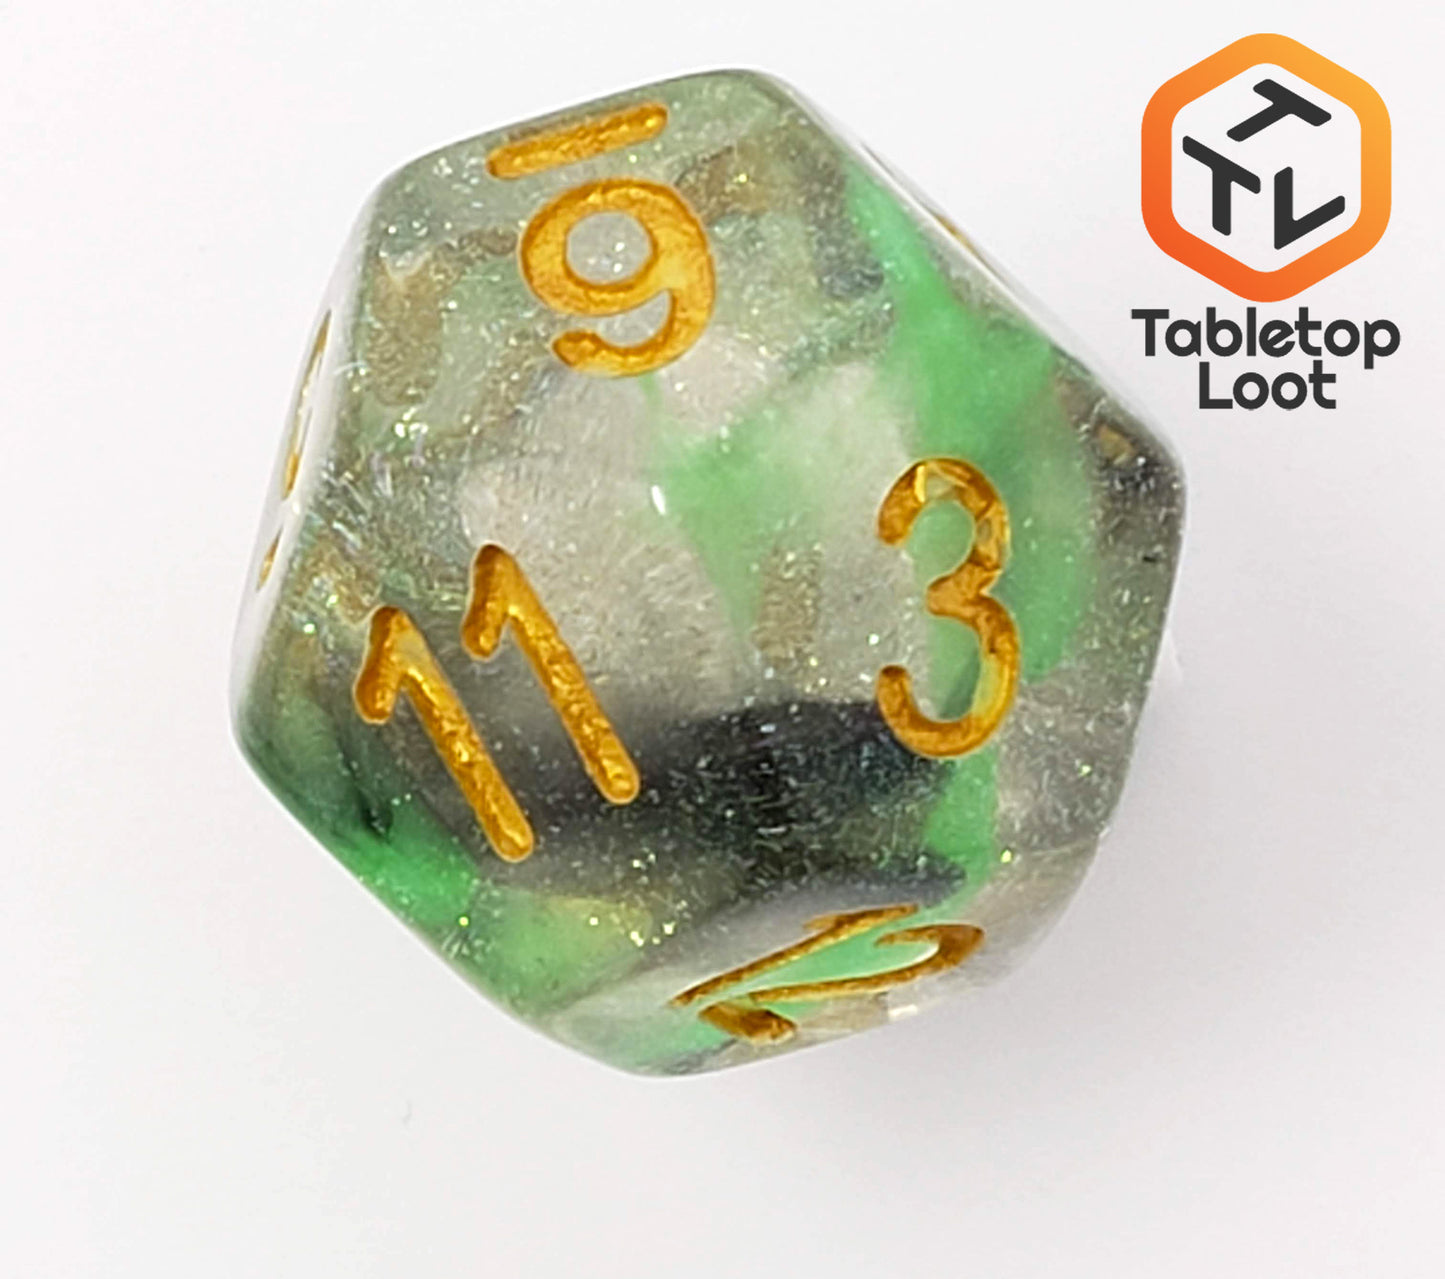 A close up of the D12 from the Luminous Venom 7 piece dice set from Tabletop Loot with green and black swirls in a clear glittery resin with gold numbering.